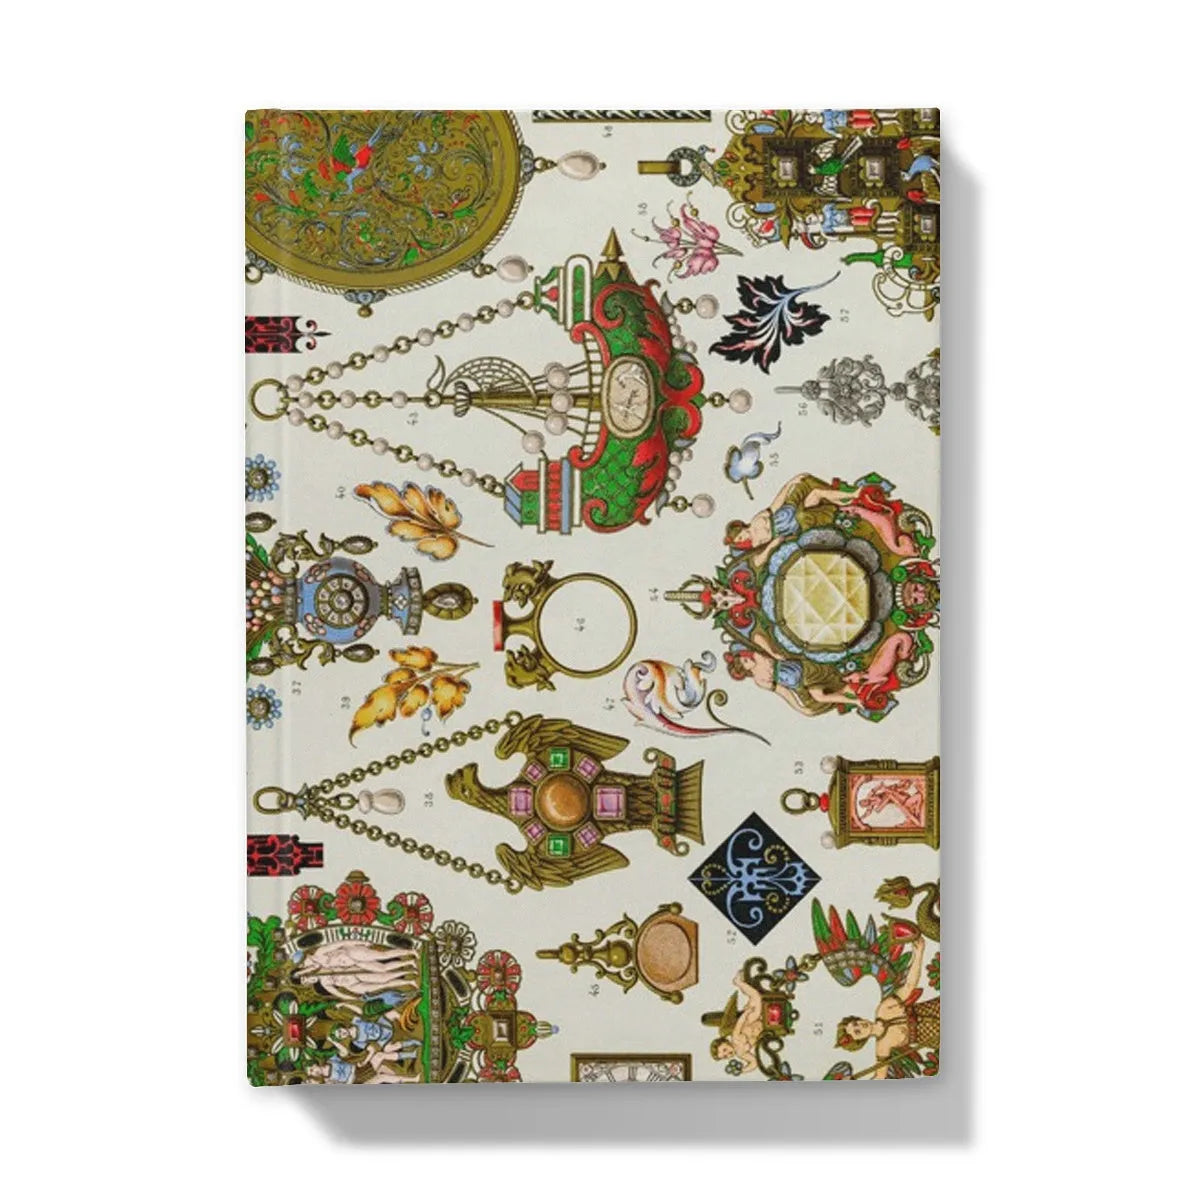 French Jewelry By Auguste Racinet Hardback Journal - 5’x7’ / Lined - Notebooks & Notepads - Aesthetic Art